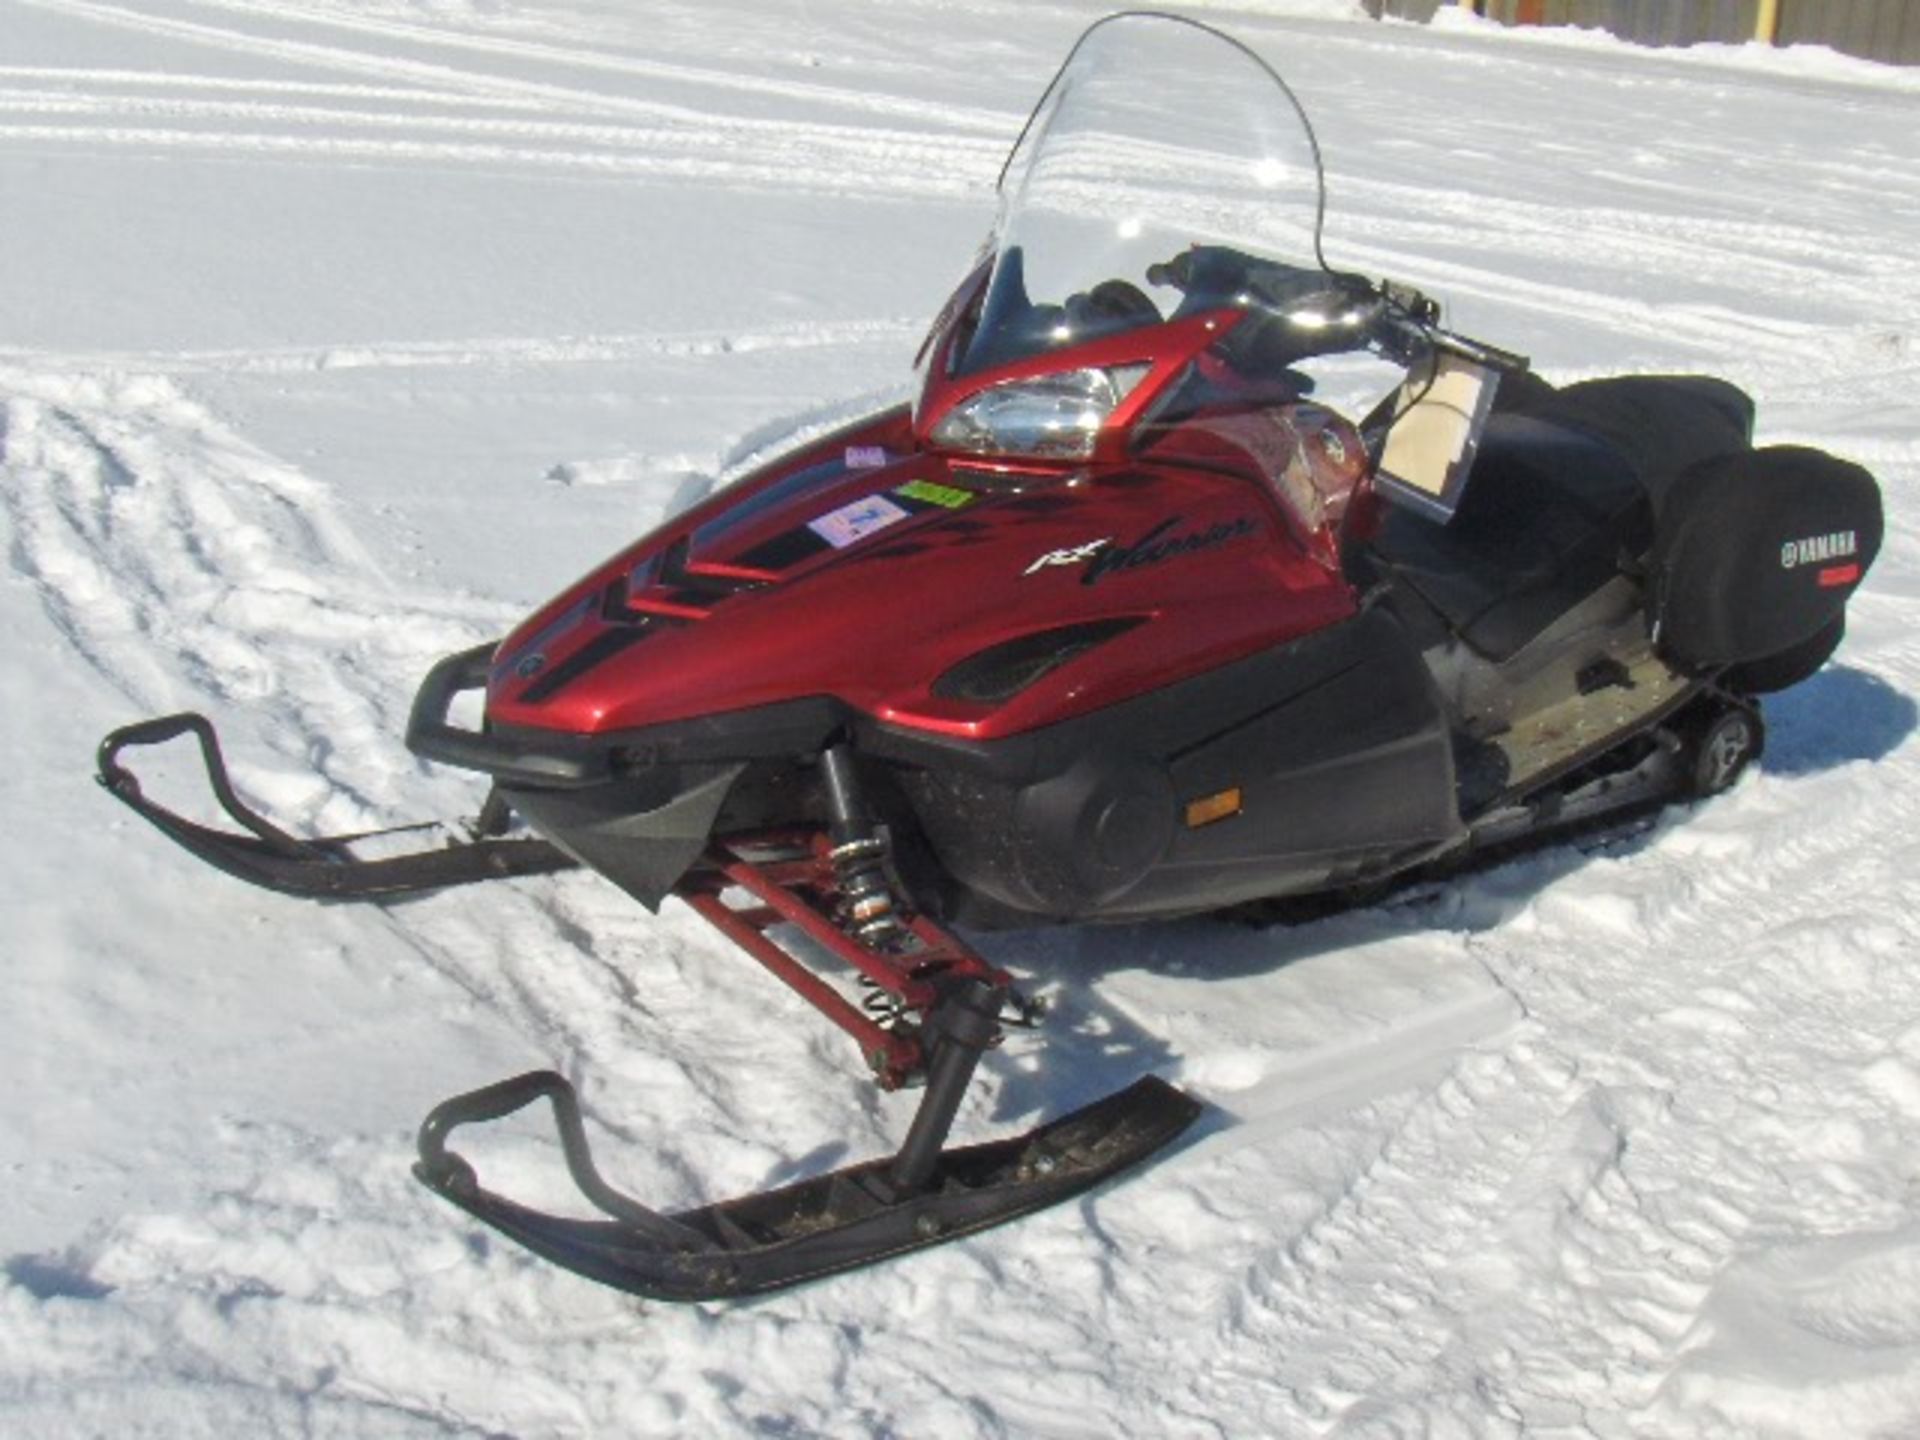 2005 YAMAHA 1100 RX WARRIOR  JYE8FX0045A001996 snowmobile, owner started at time of auction check